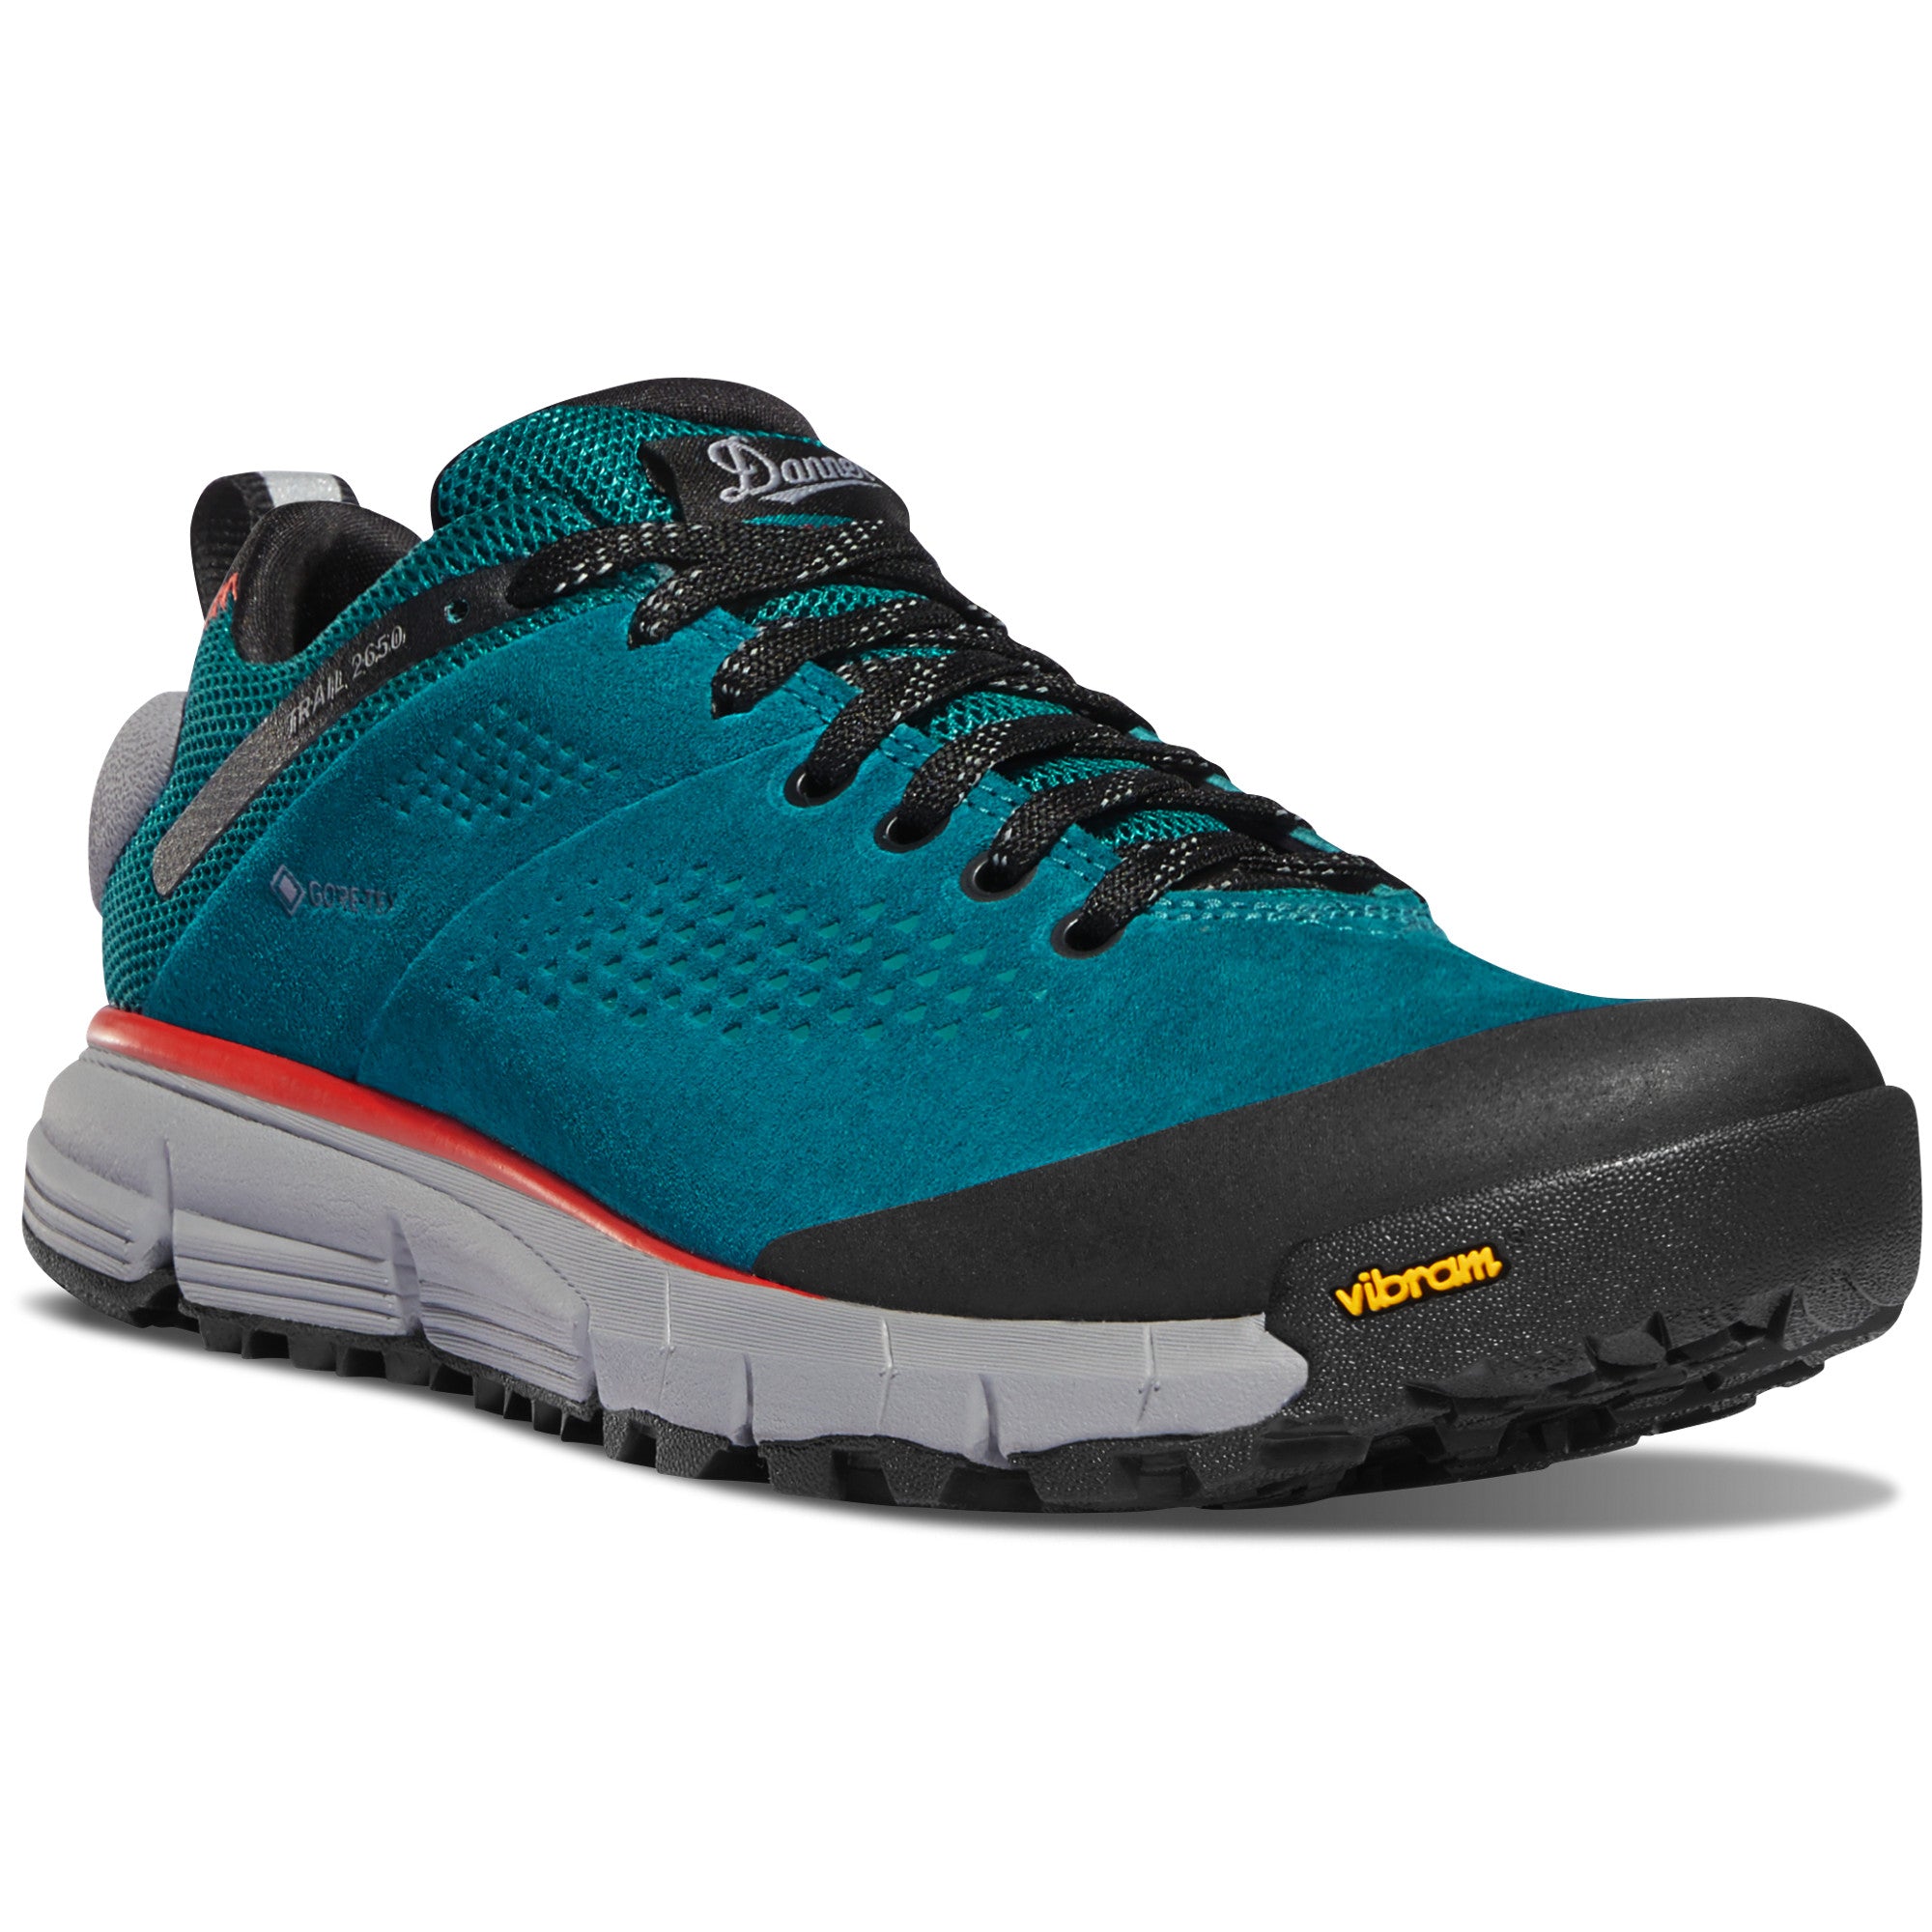 Danner Women's Trail 2650 3" Gore-Tex Waterproof Hiking Shoe in Current Blue from the side